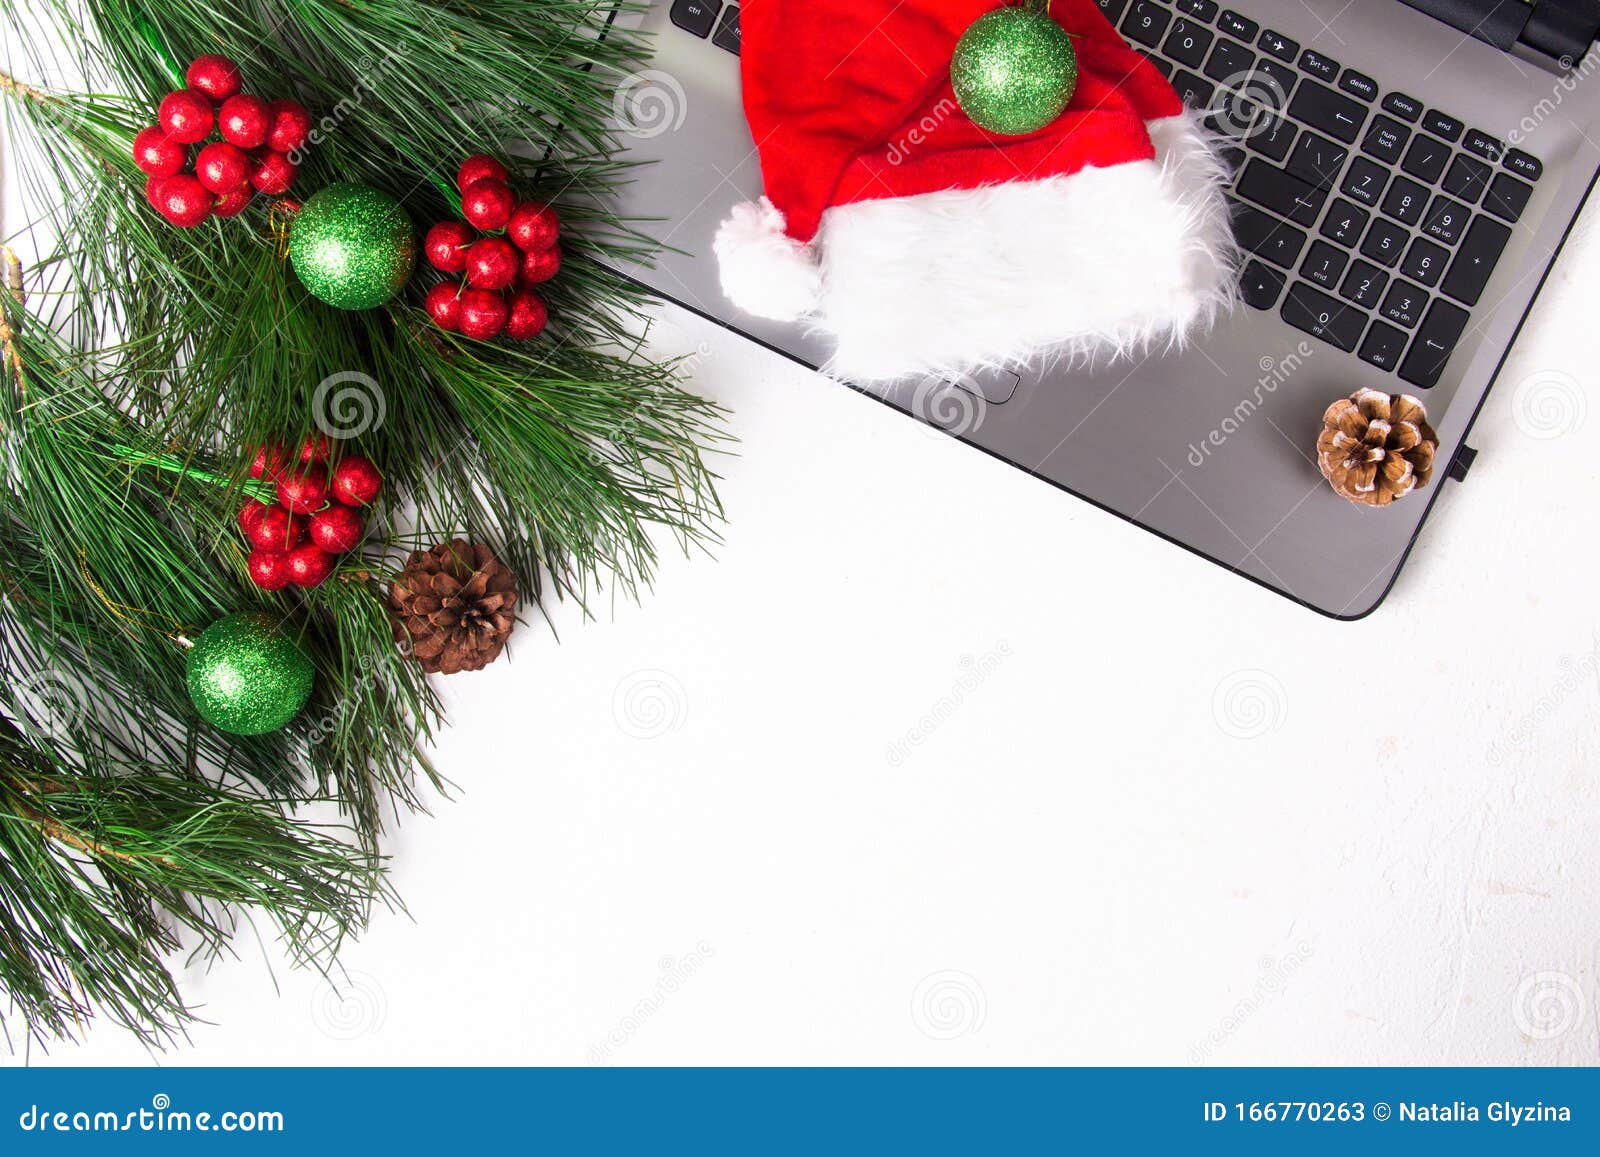 Office White Table with Computer, Pine Branch and Santa Hat. Christmas  Background Stock Image - Image of holiday, coffee: 166770263